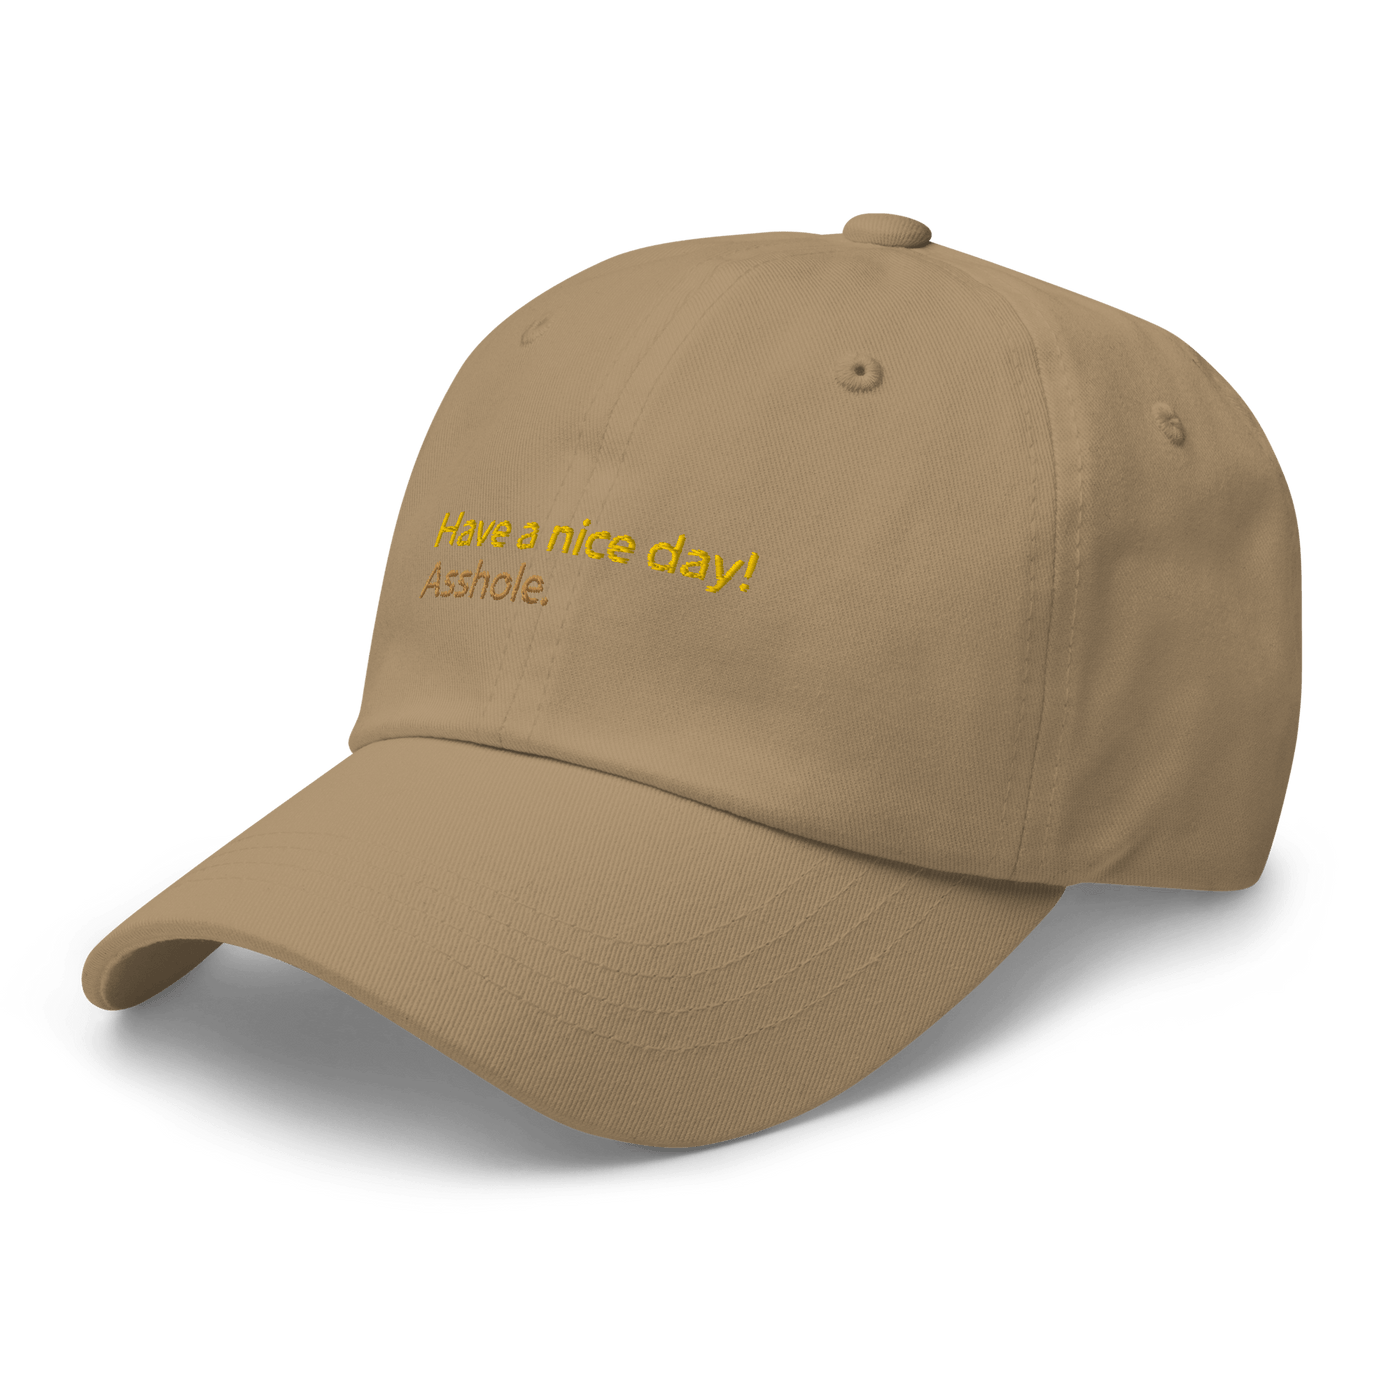 Have a nice day! (asshole) Dad hat - Khaki - - Just Another Cap Store